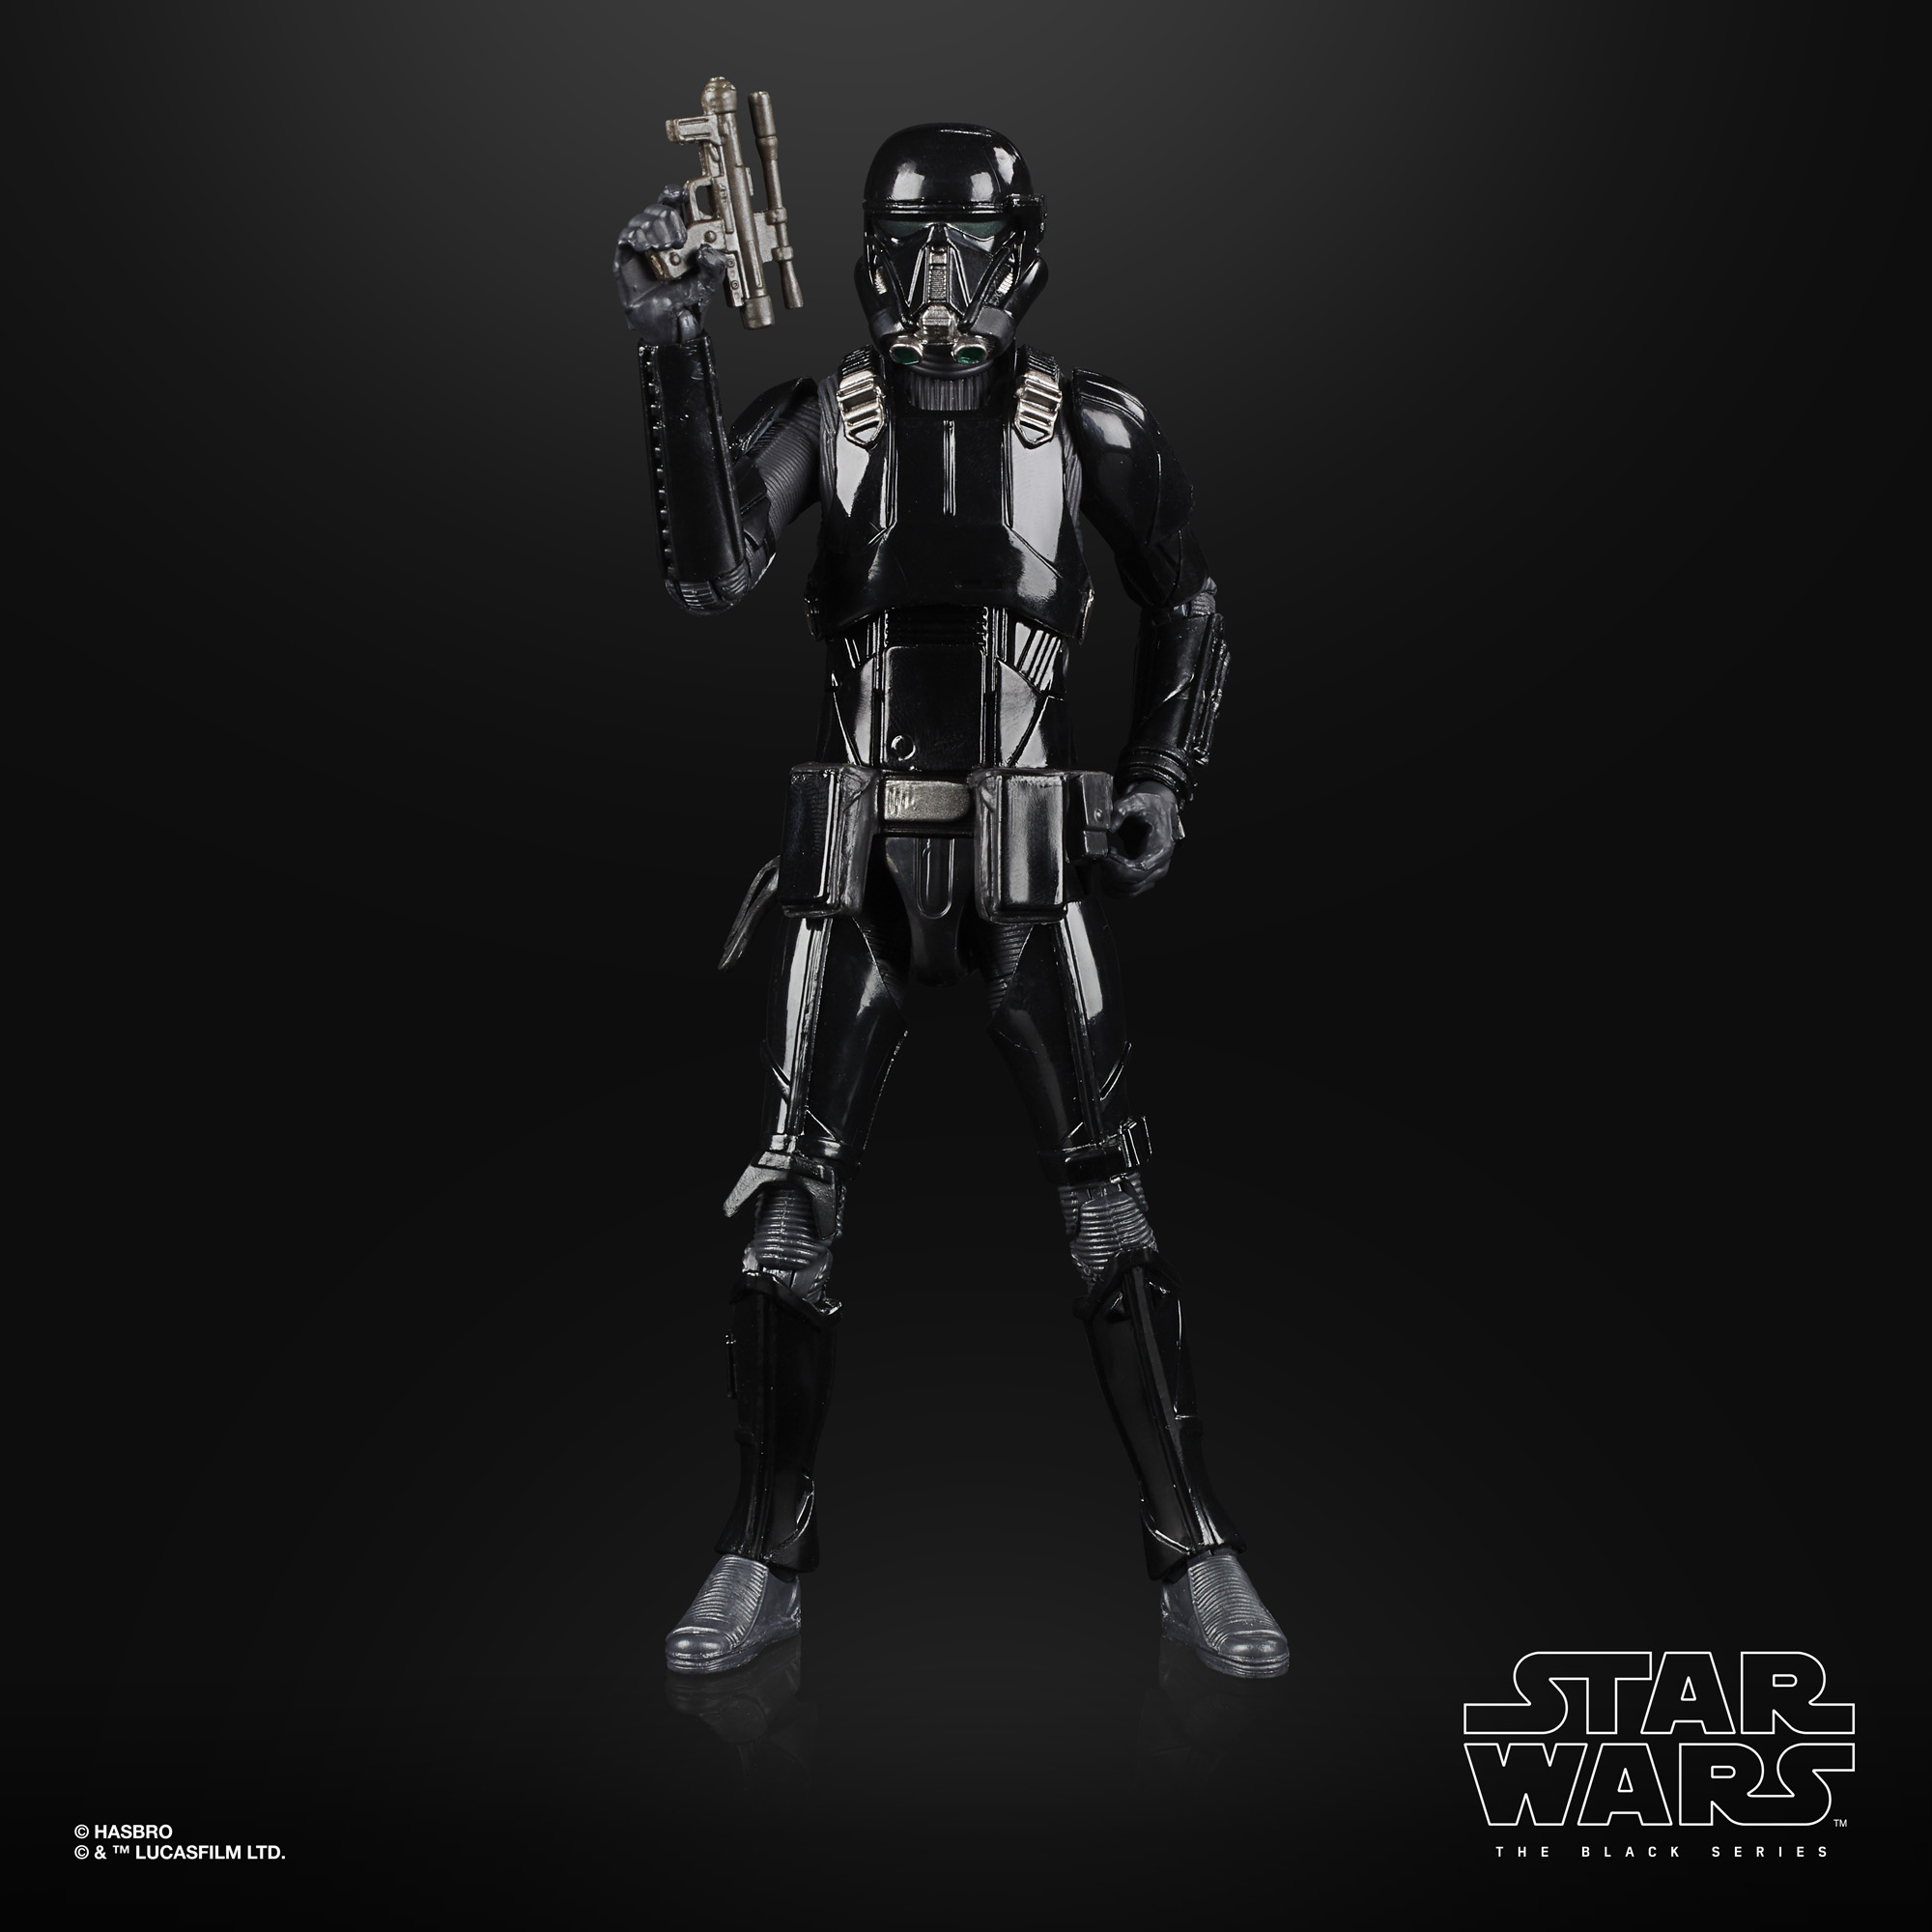 Star Wars The Black Series Archive Line Archive Imperial Death Trooper 15cm F19075L00 5010993825417 